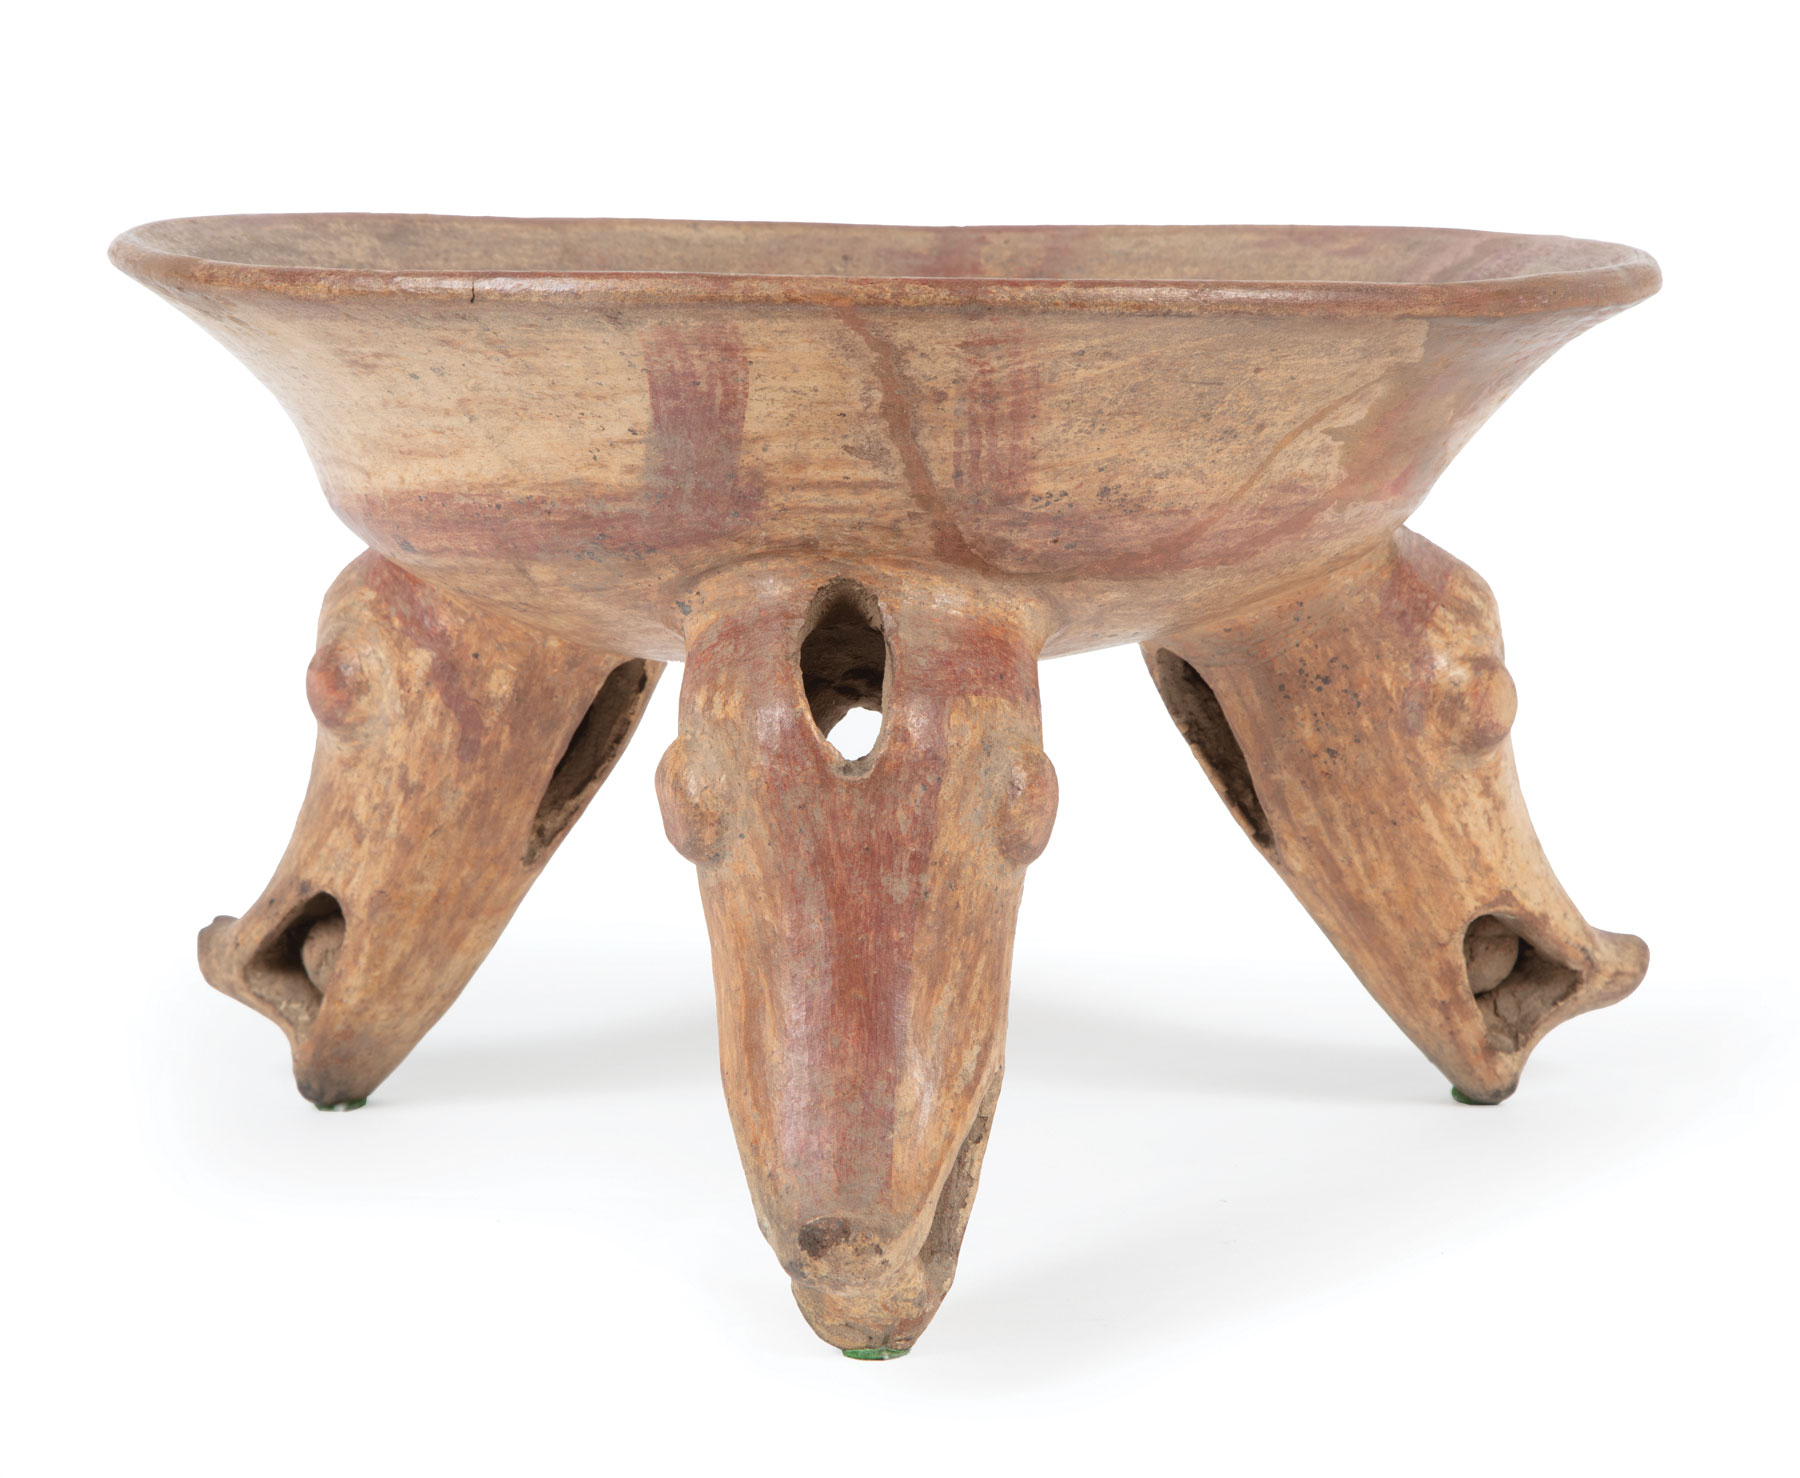 Pre-Columbian Pottery Tripod Bowl , 800-1500 A.D., Costa Rica, possibly Nicoya, red slip design, - Image 2 of 2